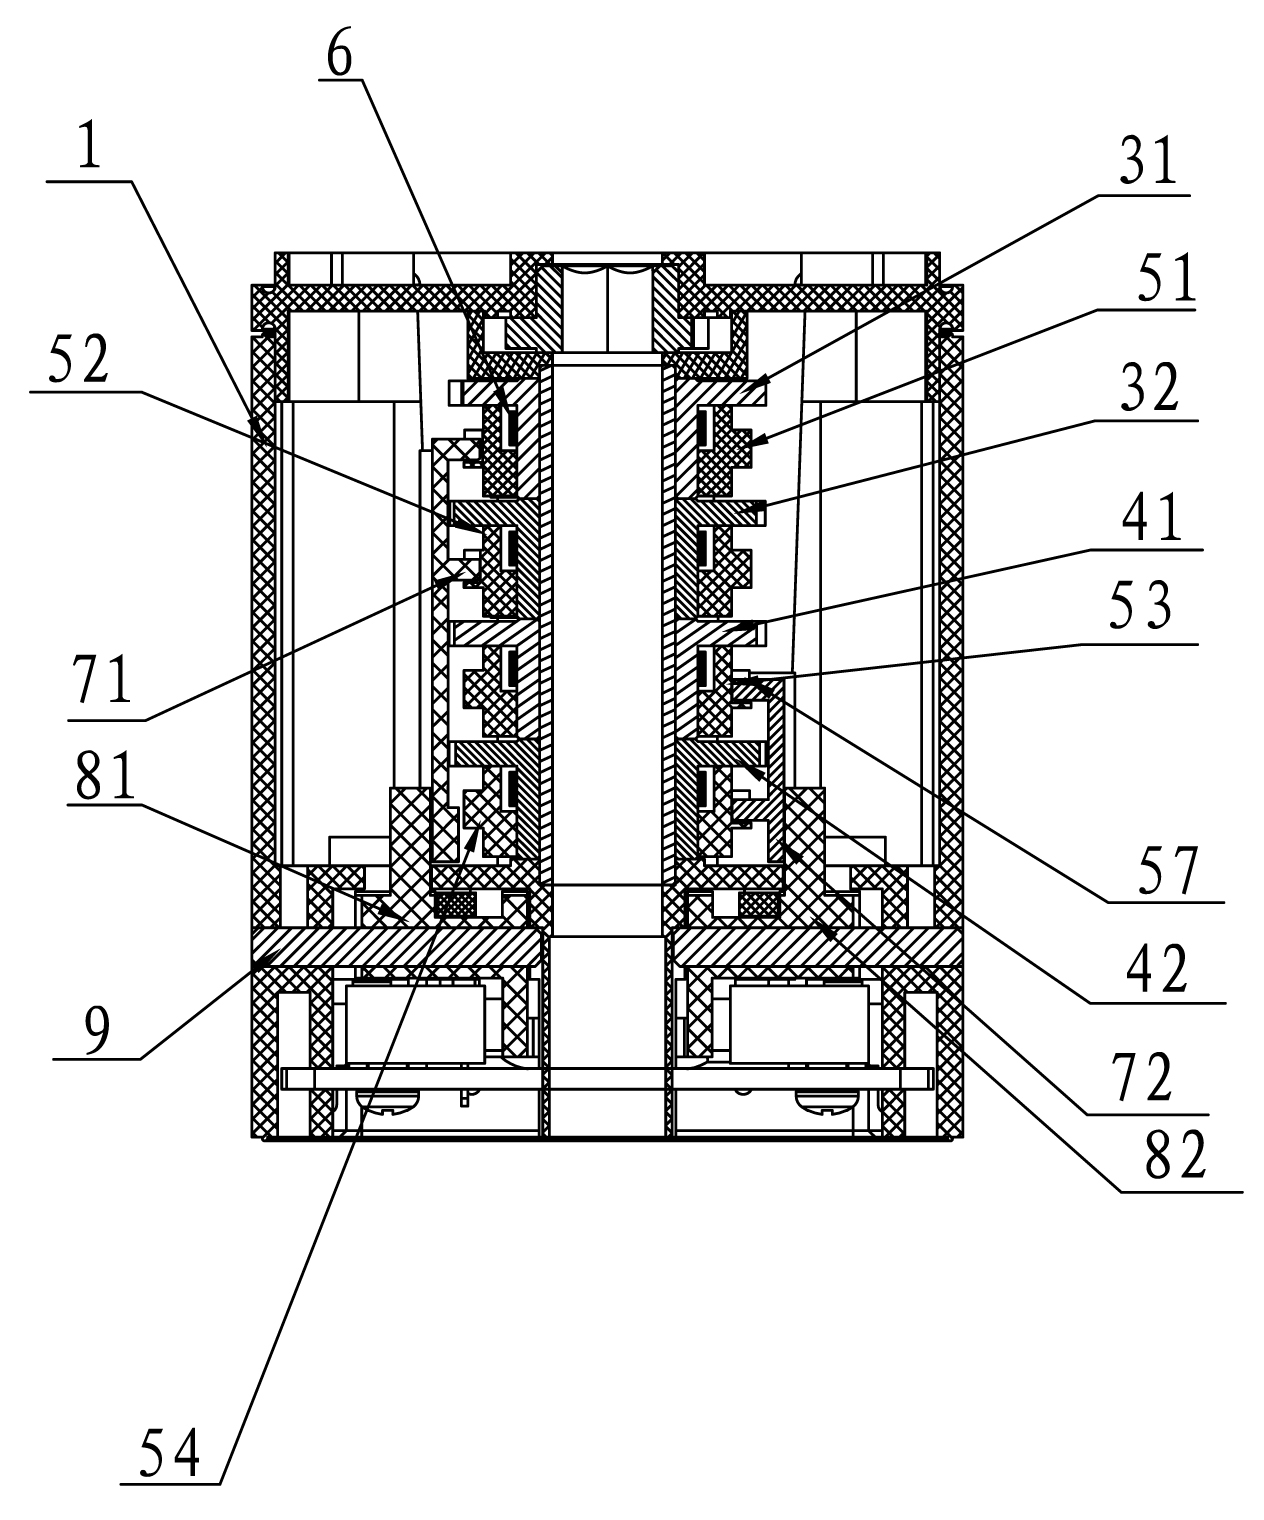 Positioning device based on mechanical counting of motor